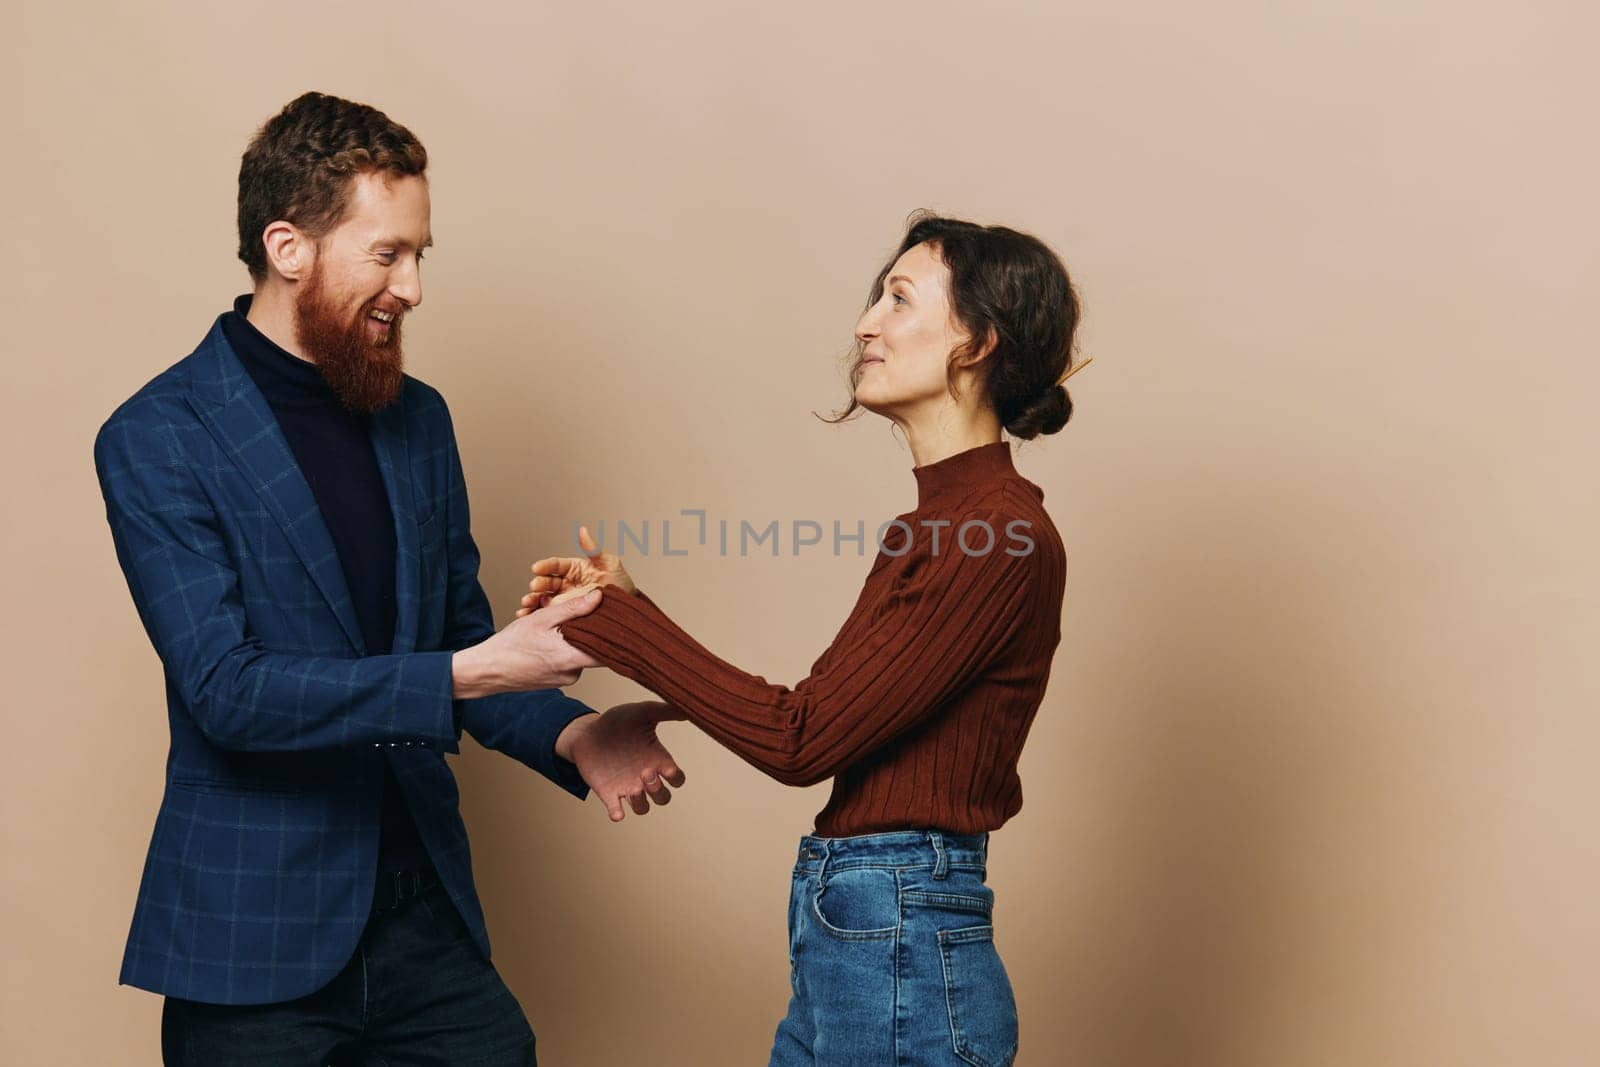 Man and woman couple in a relationship smile and interaction on a beige background in a real relationship between people by SHOTPRIME